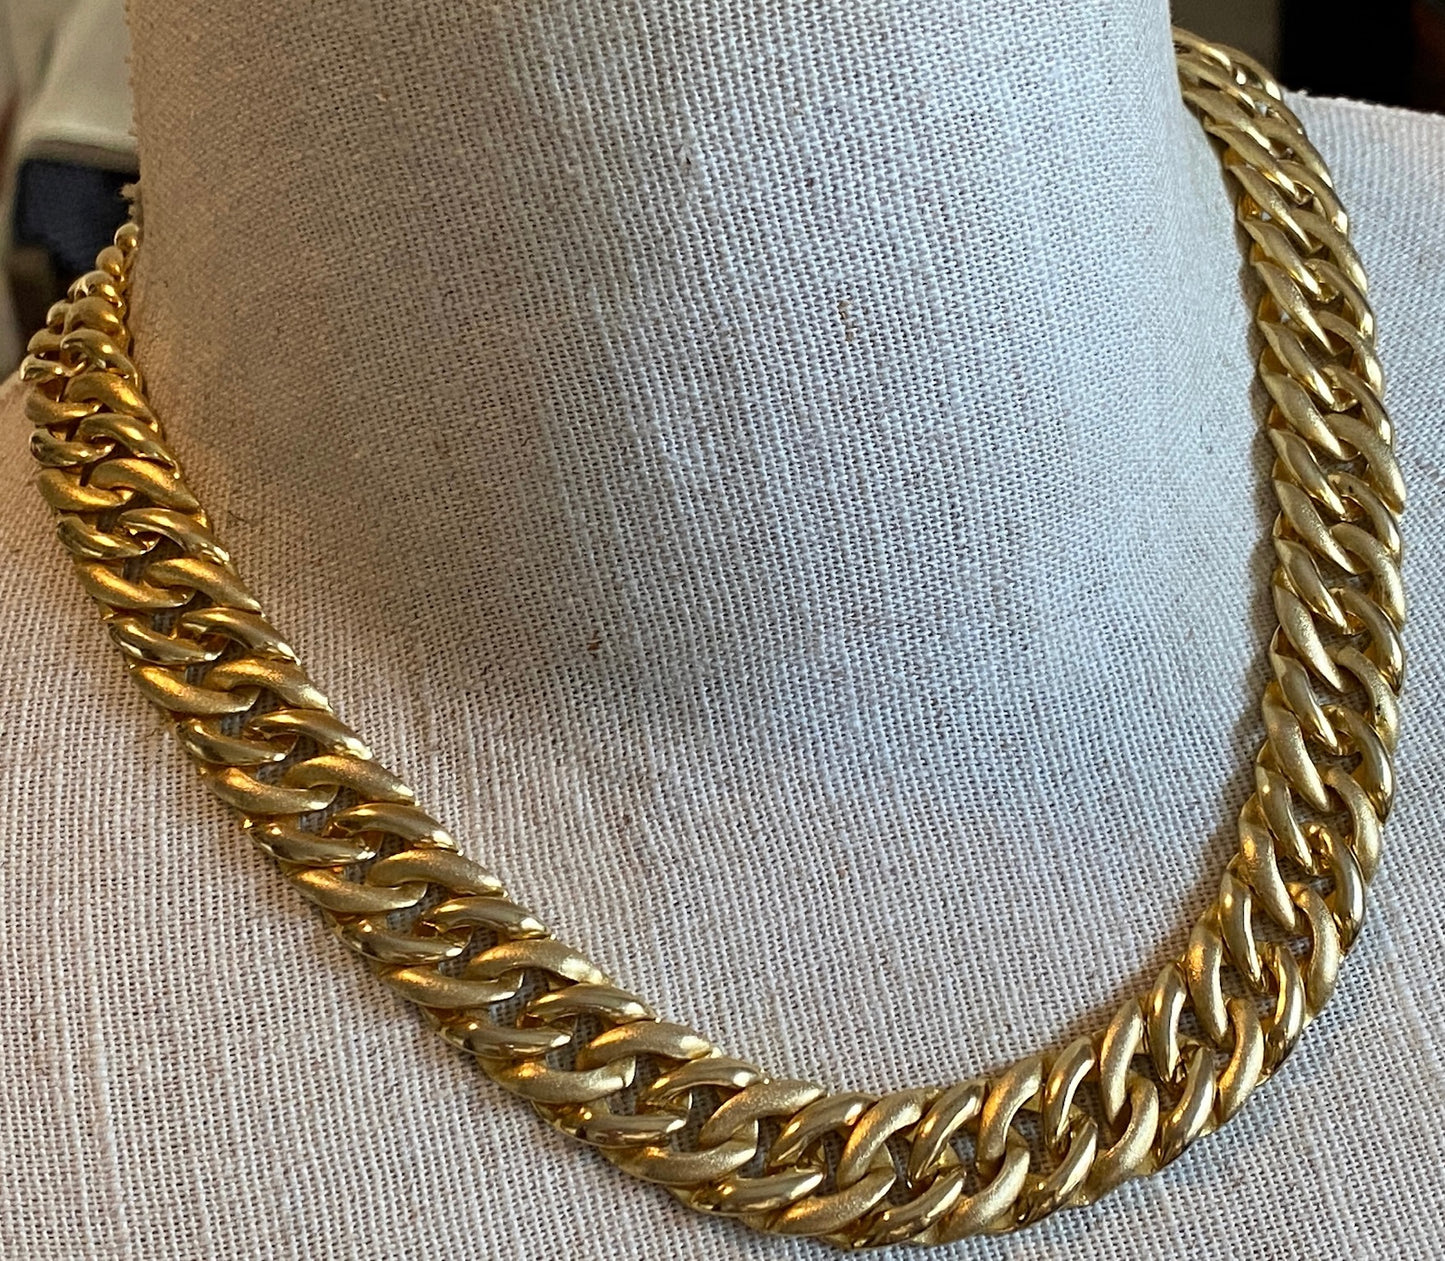 Vintage 80's Two Tone Gold Textured Shiny Curb Link Collar Necklace